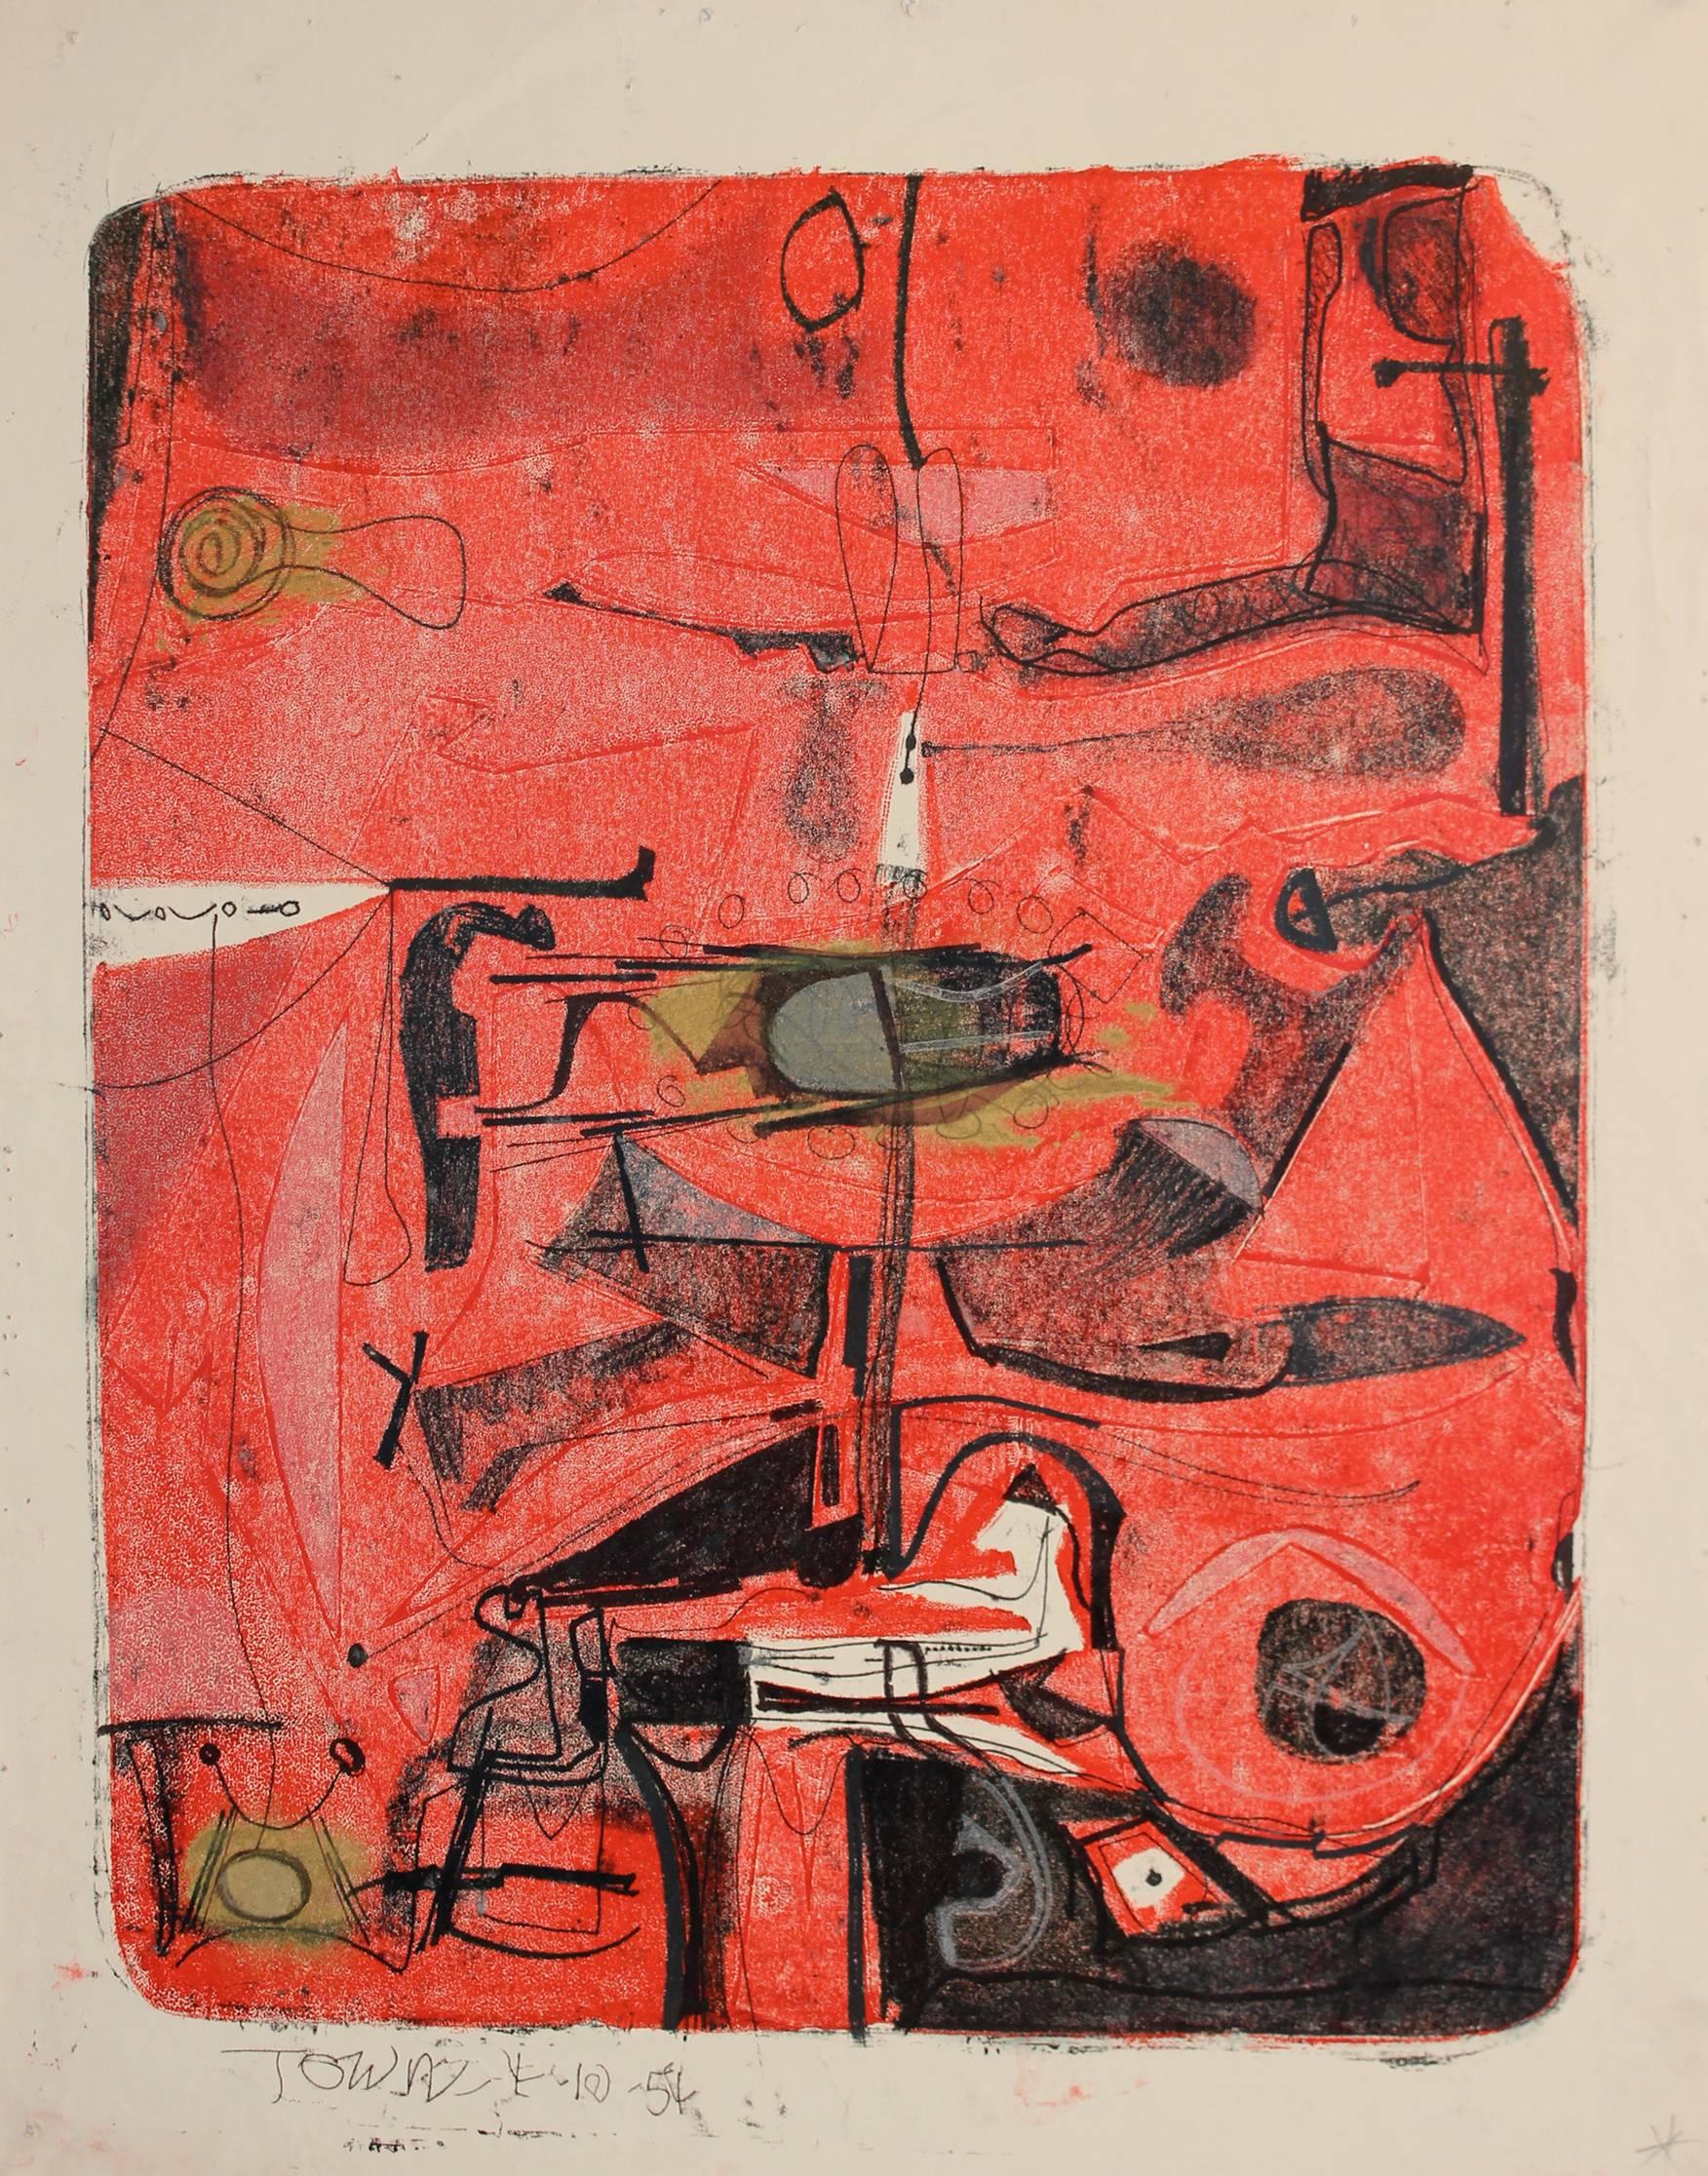 Harold Town Abstract Print - Untitled Red and Black, abstract monoprint (Single Autographic Print)